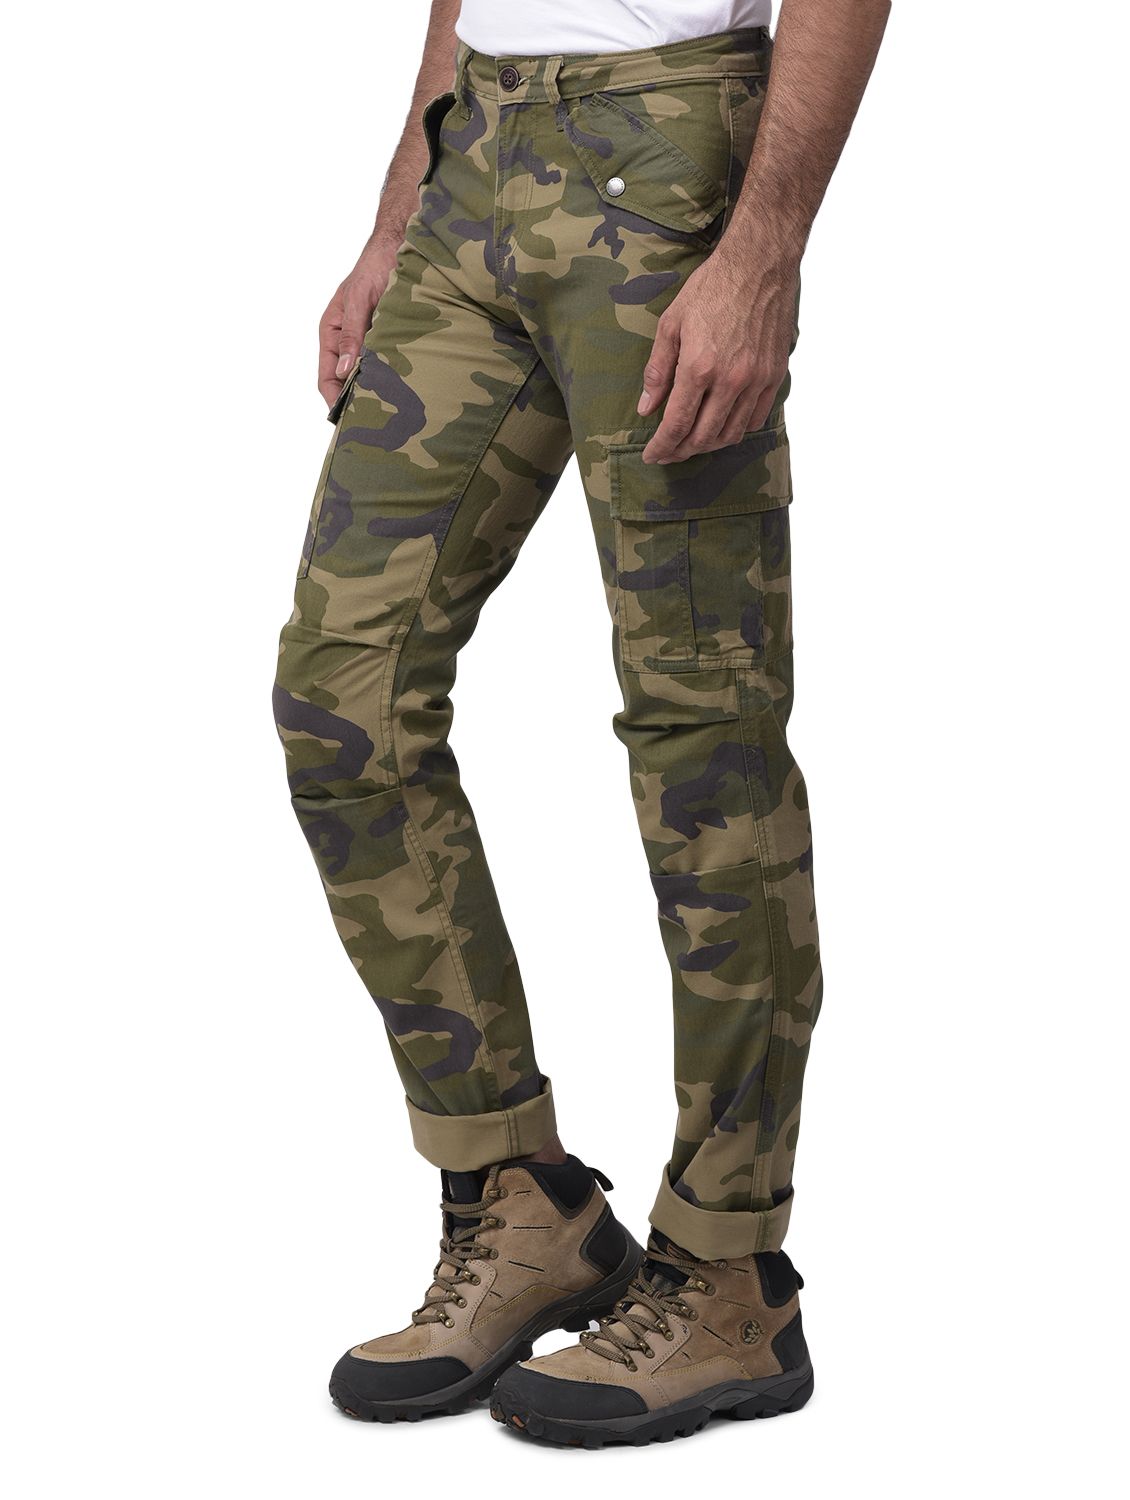 Camouflage green cargo pants